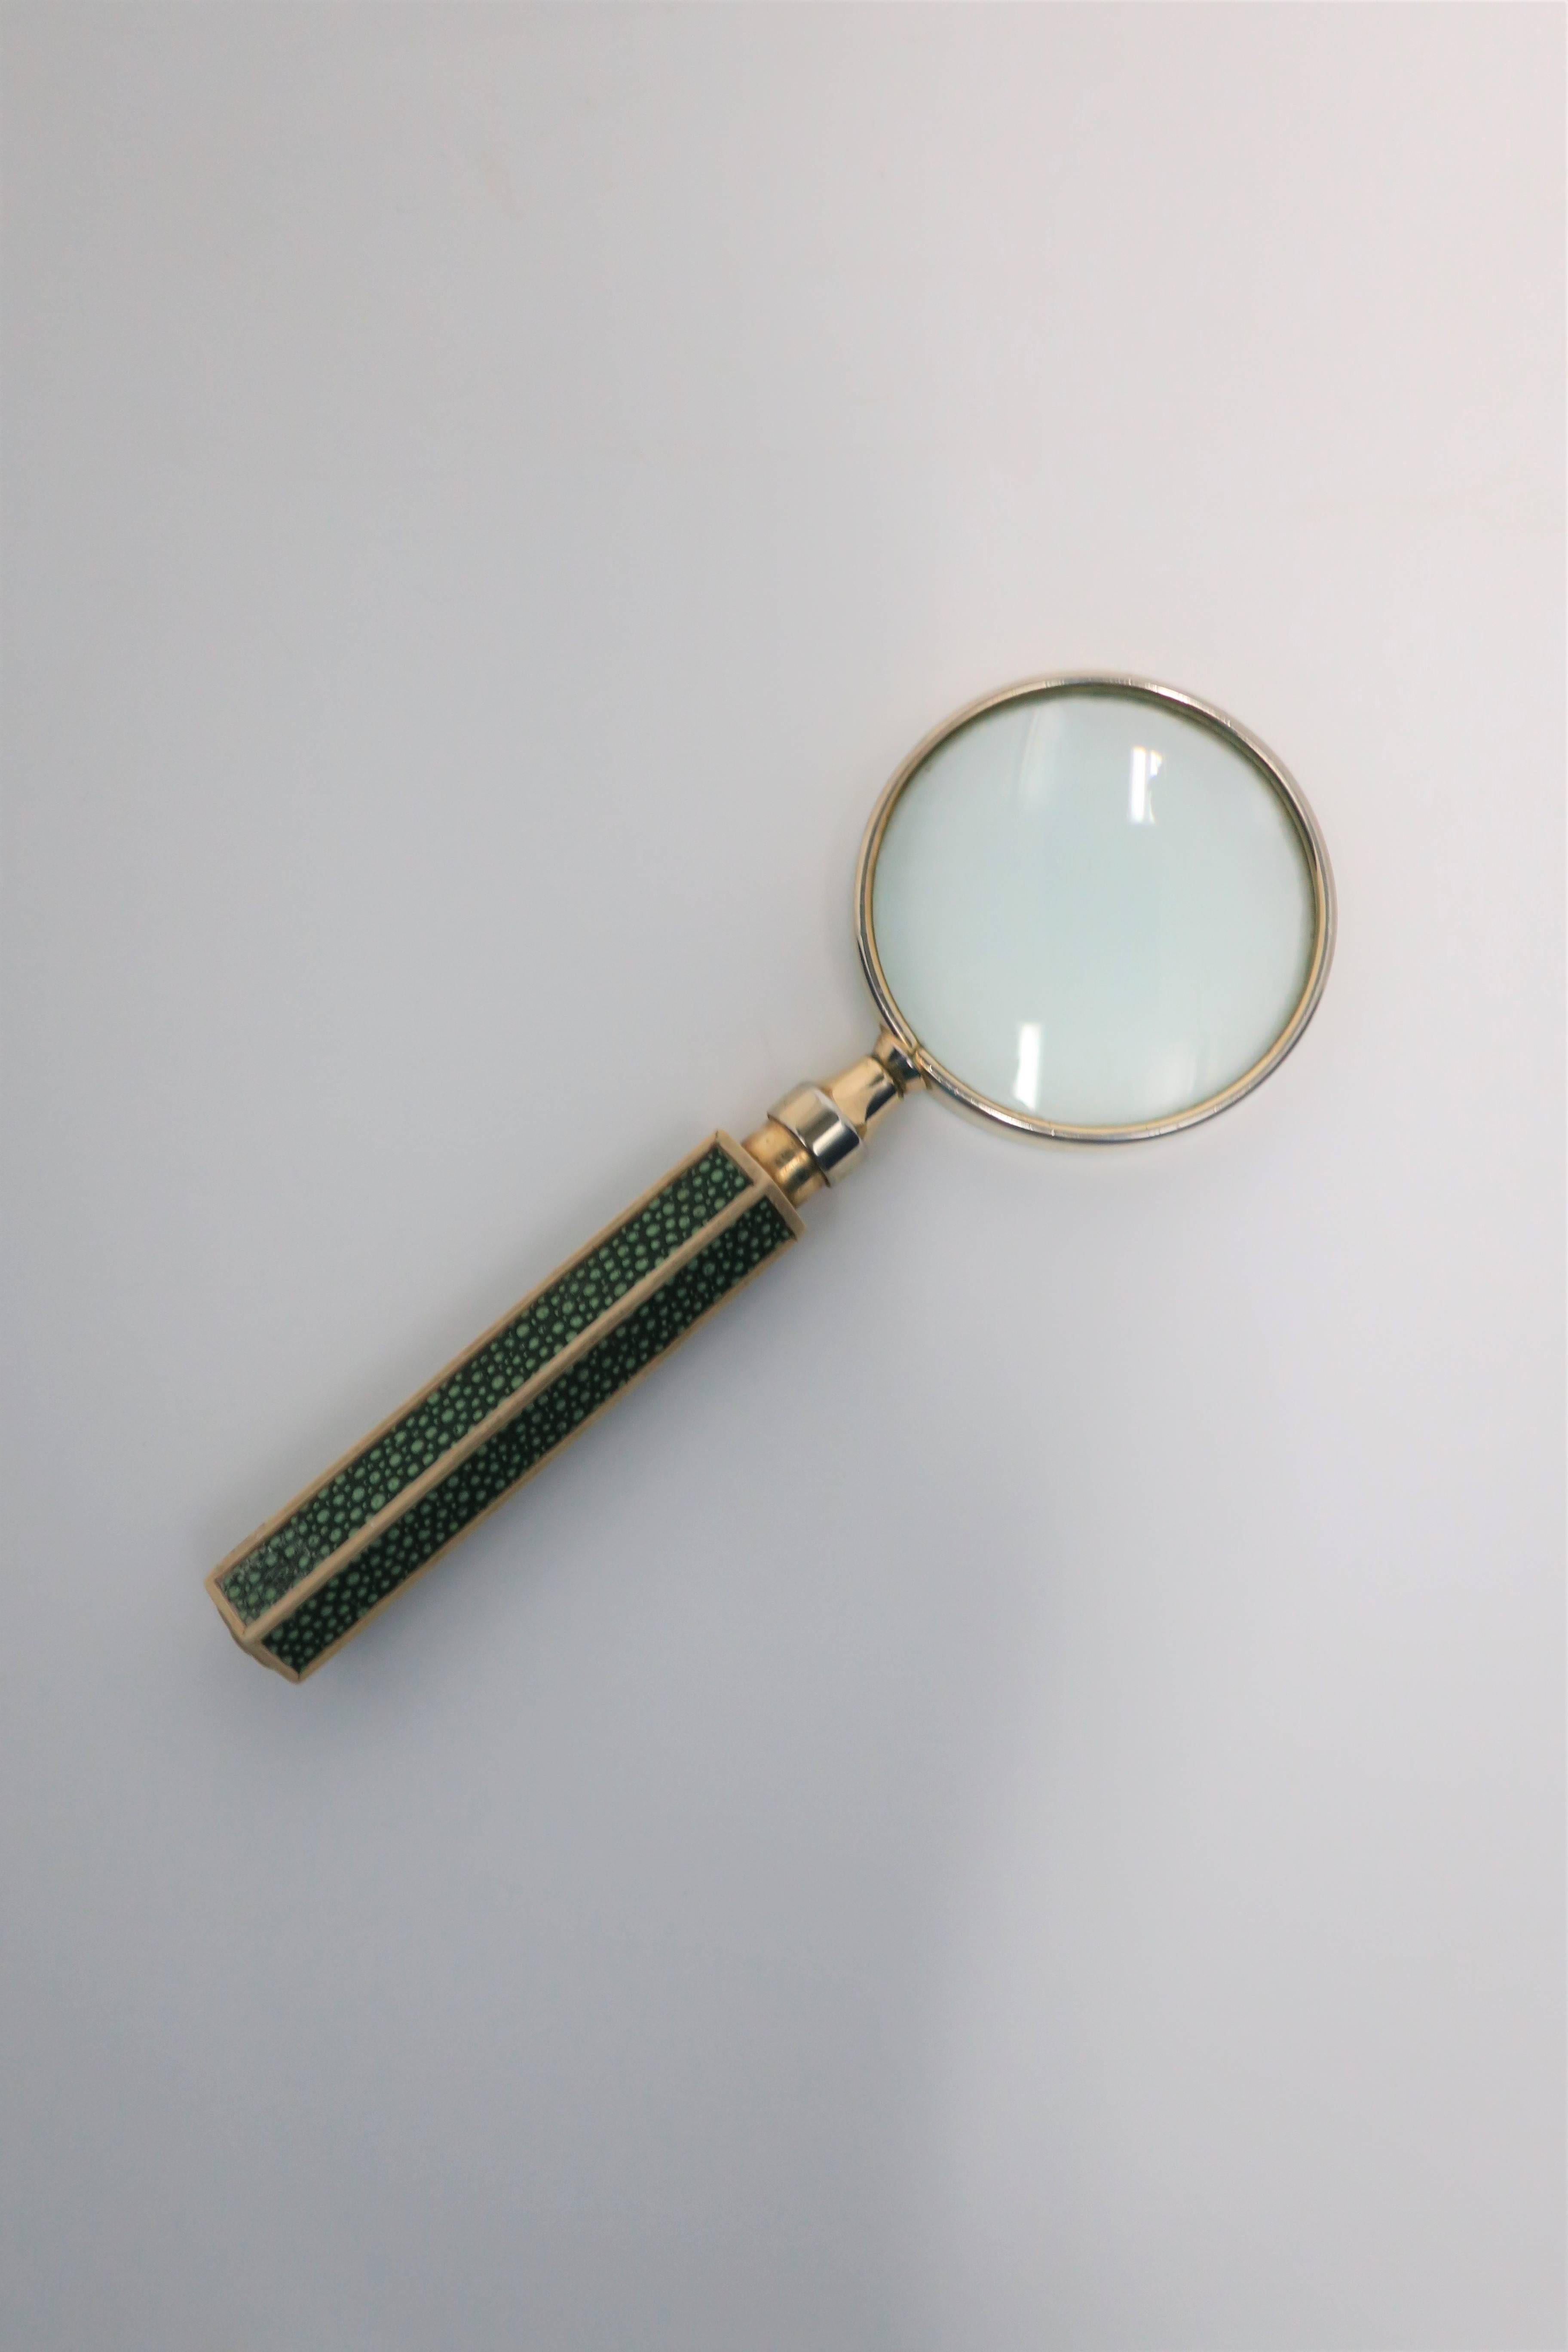 A vintage Modern style magnifying glass with two-tone metal and green shagreen-esque (faux) handle design, in the style of designer Karl Springer. A great desk accessory. 

